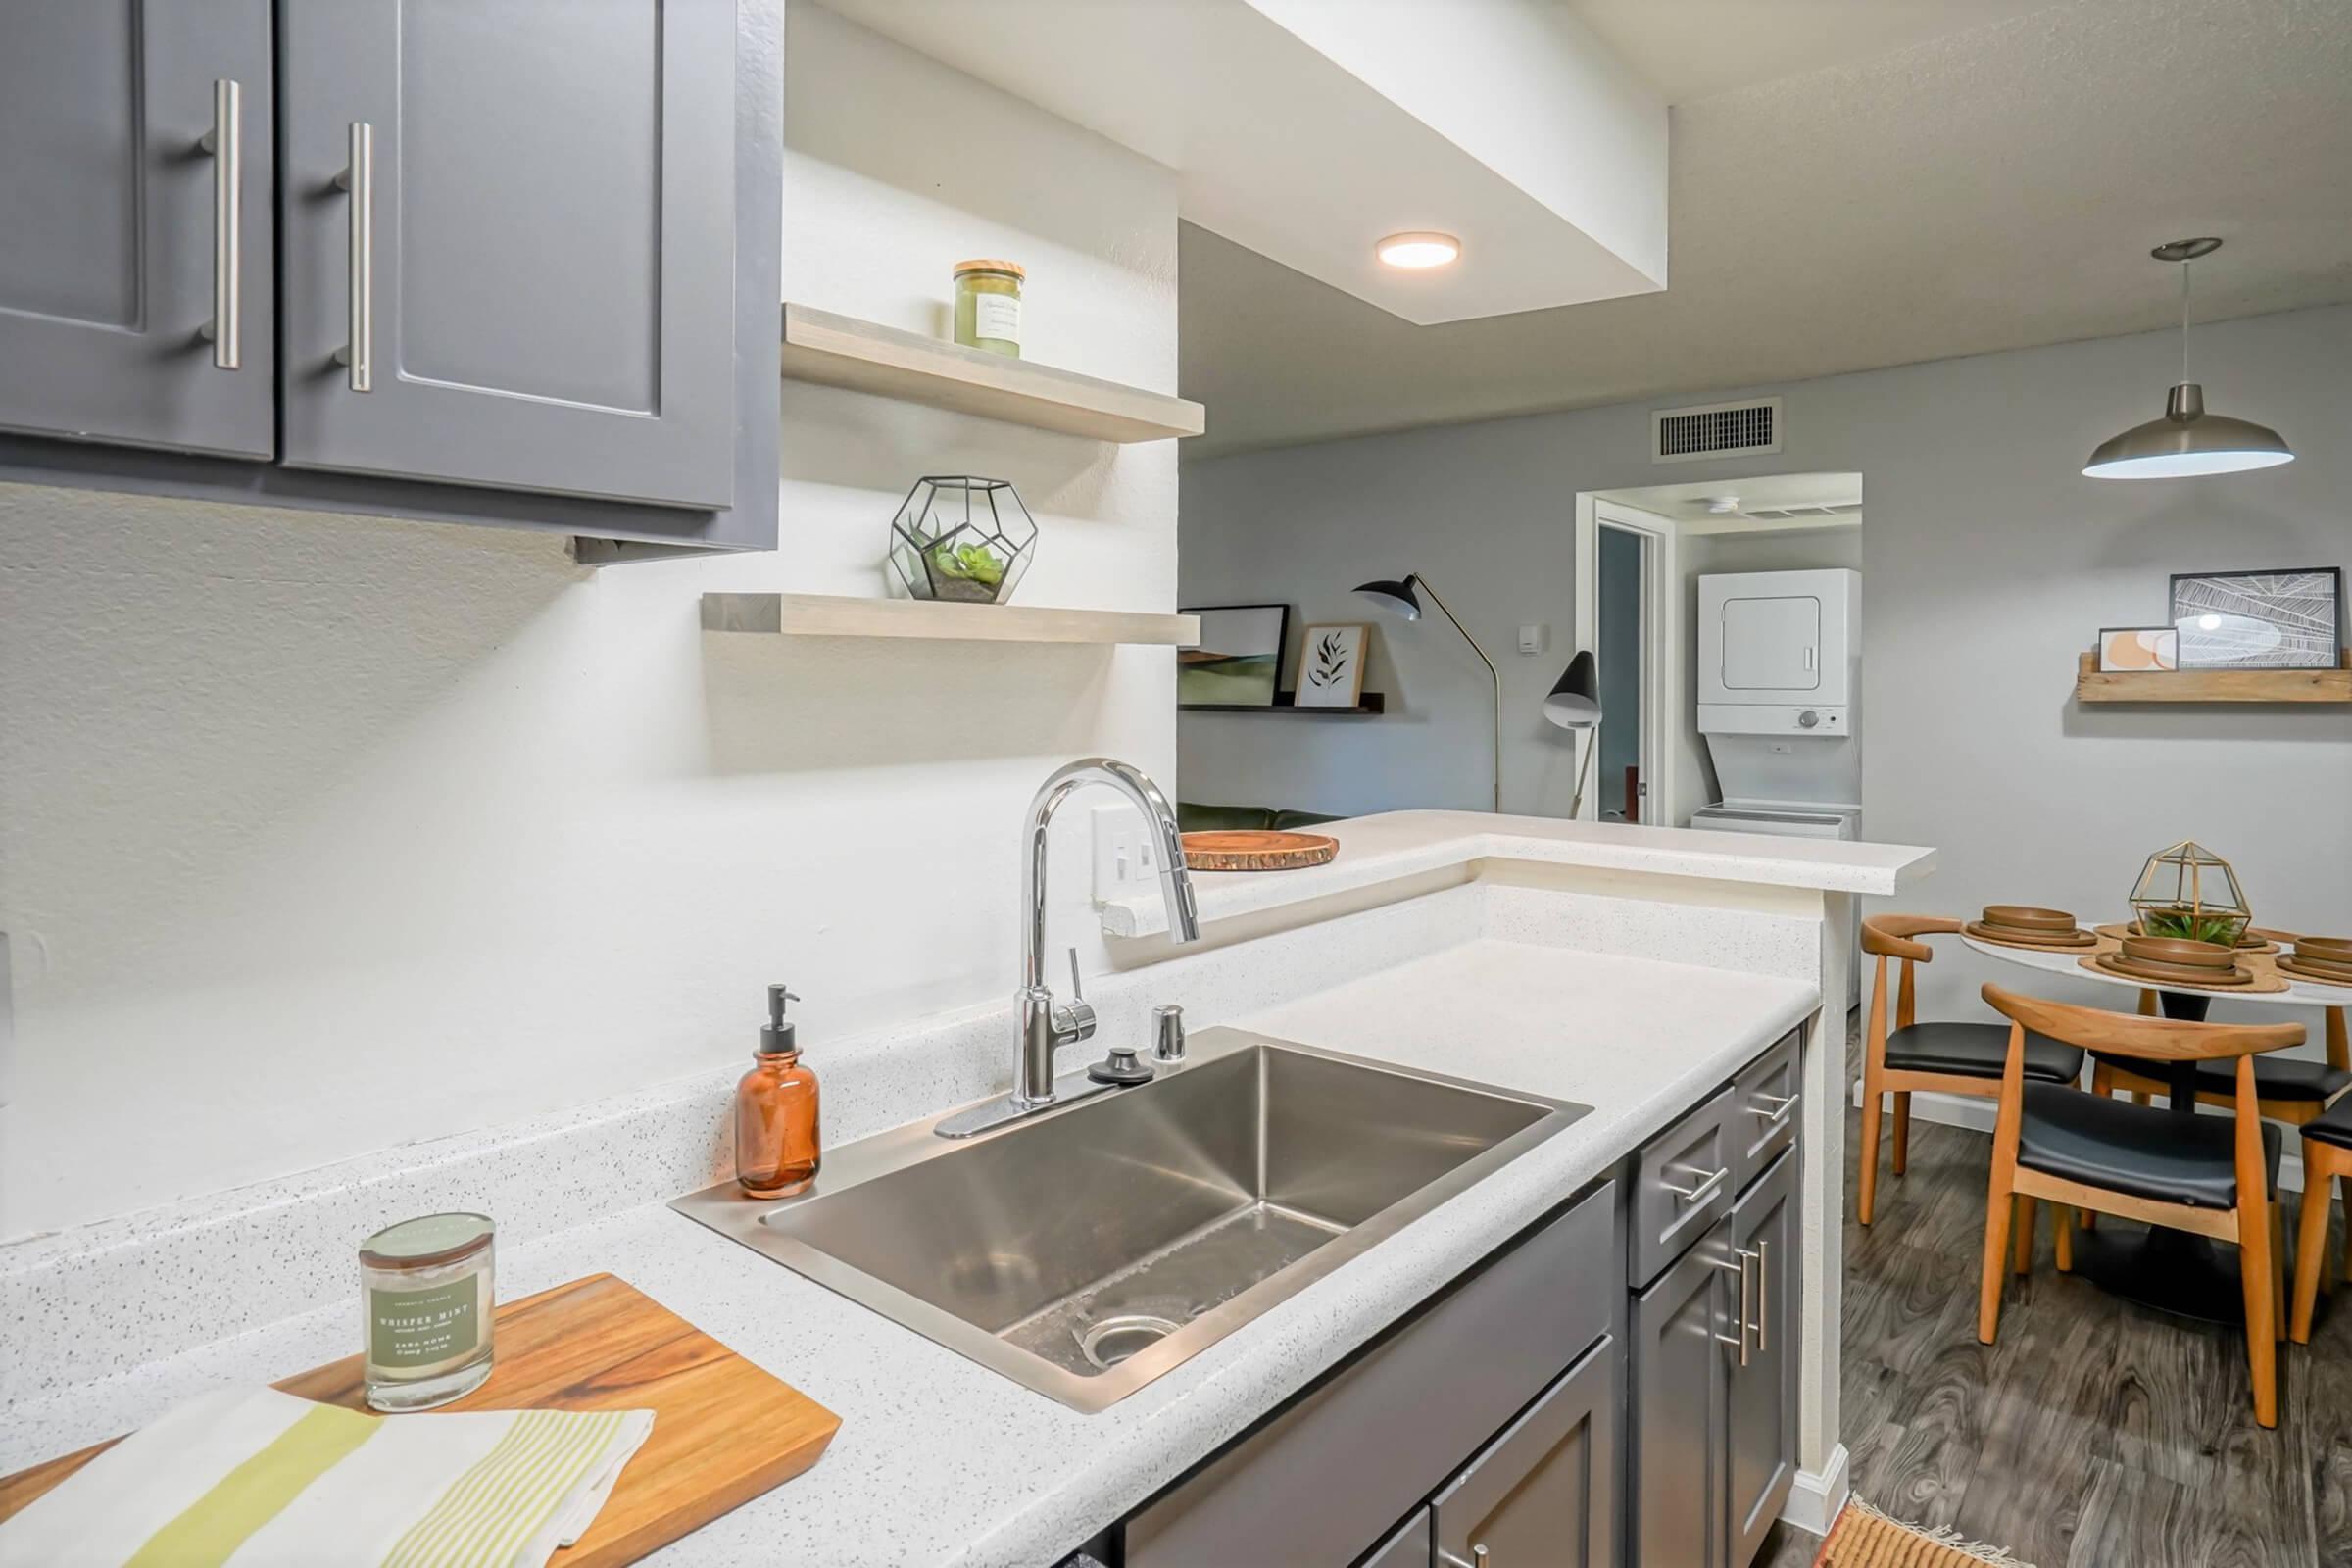 Full Kitchen Appliance Package - Treehouse Apartments - Albuquerque - New Mexico